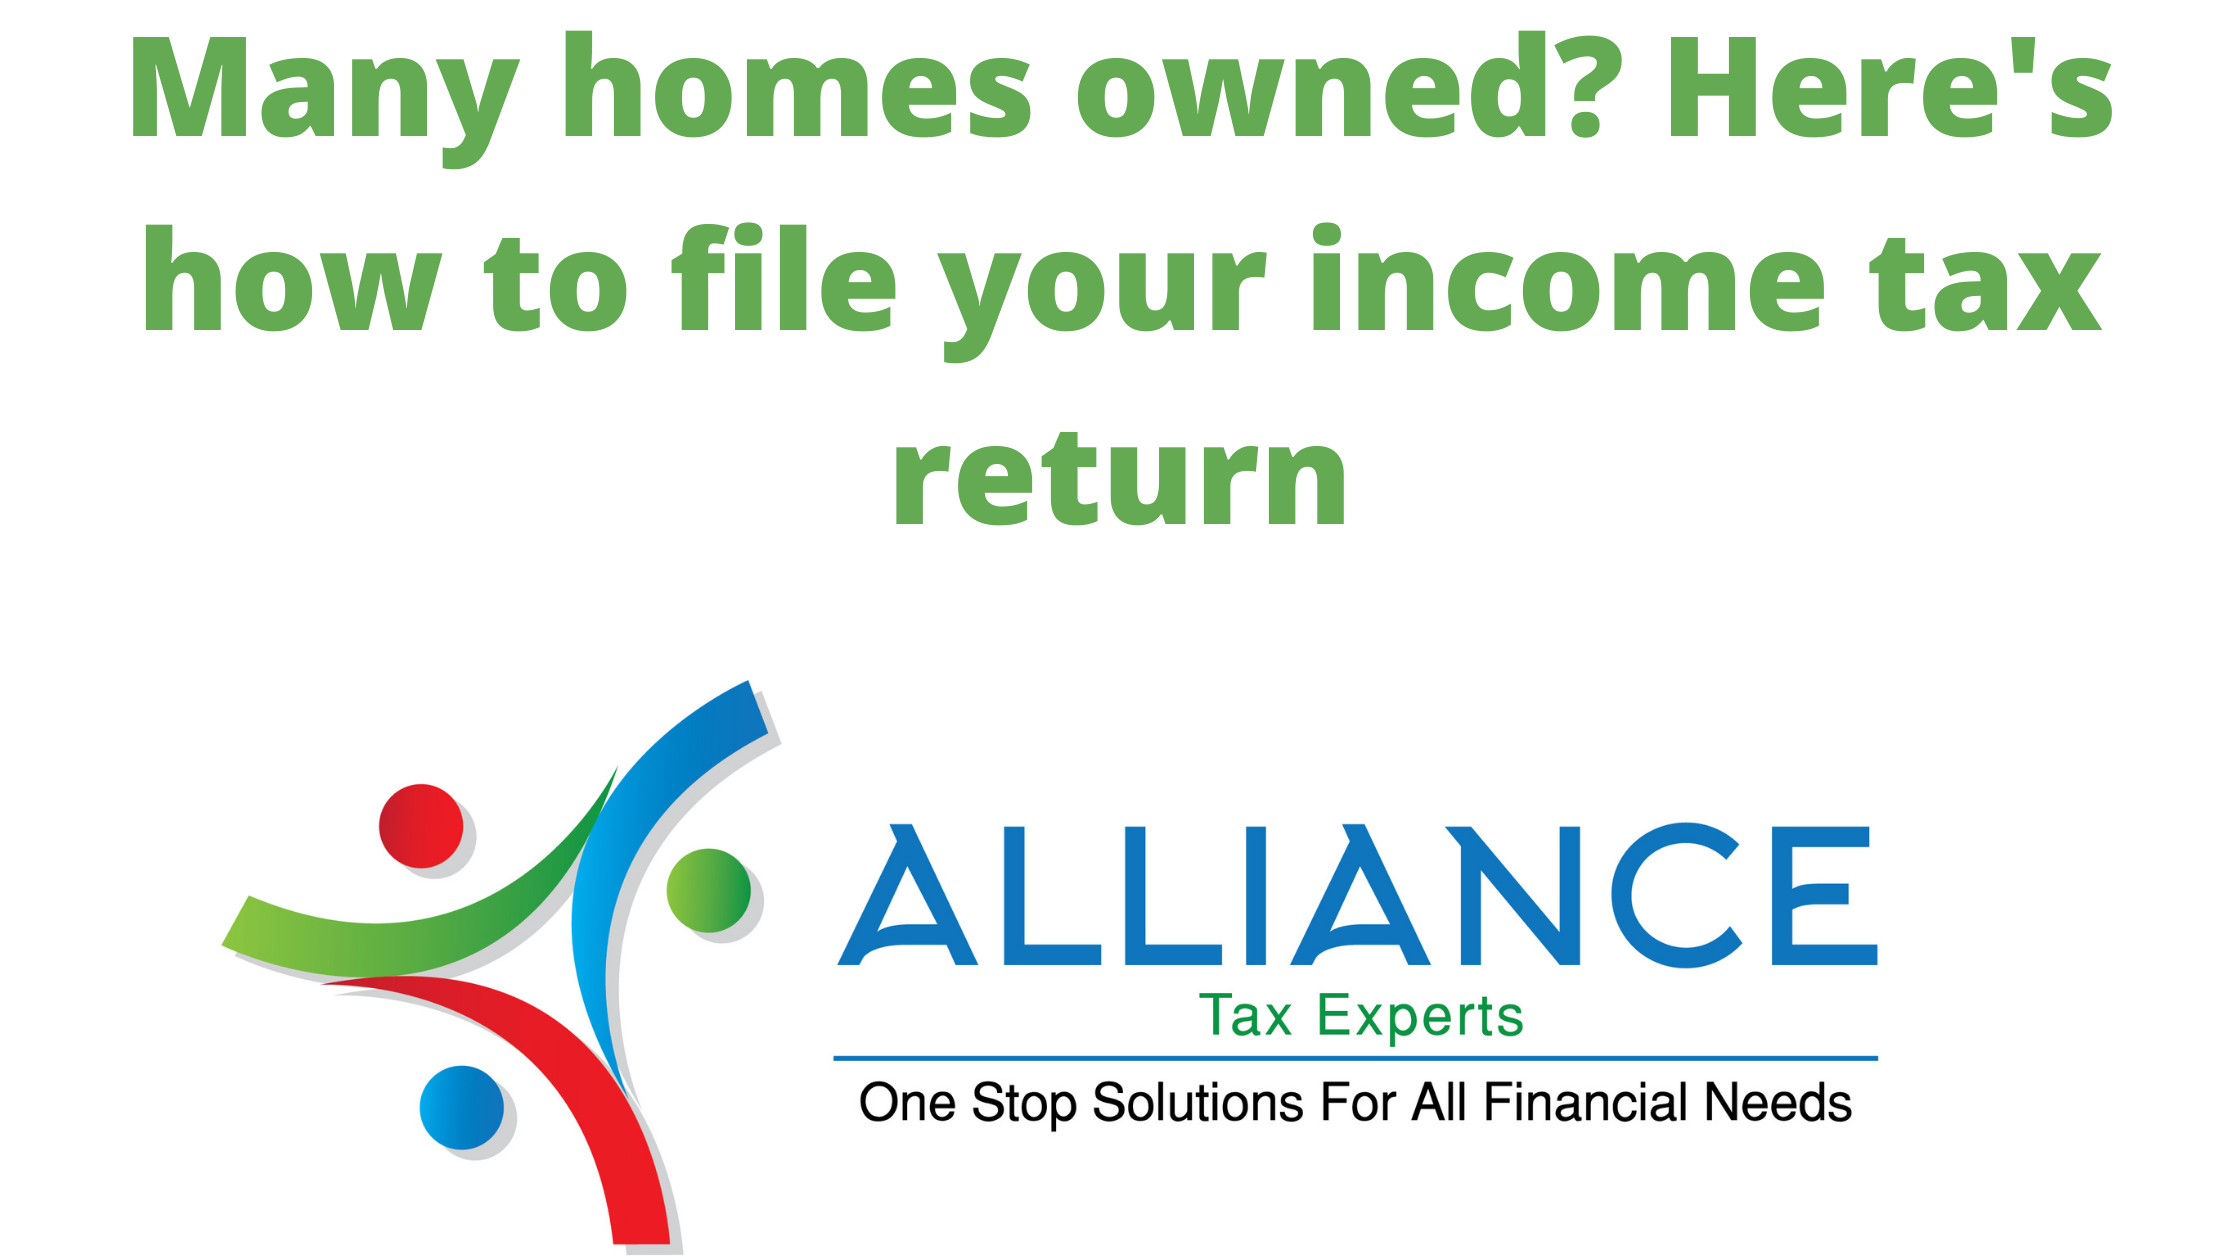 alliance-tax-experts-many-homes-owned-here-how-to-file-your-income